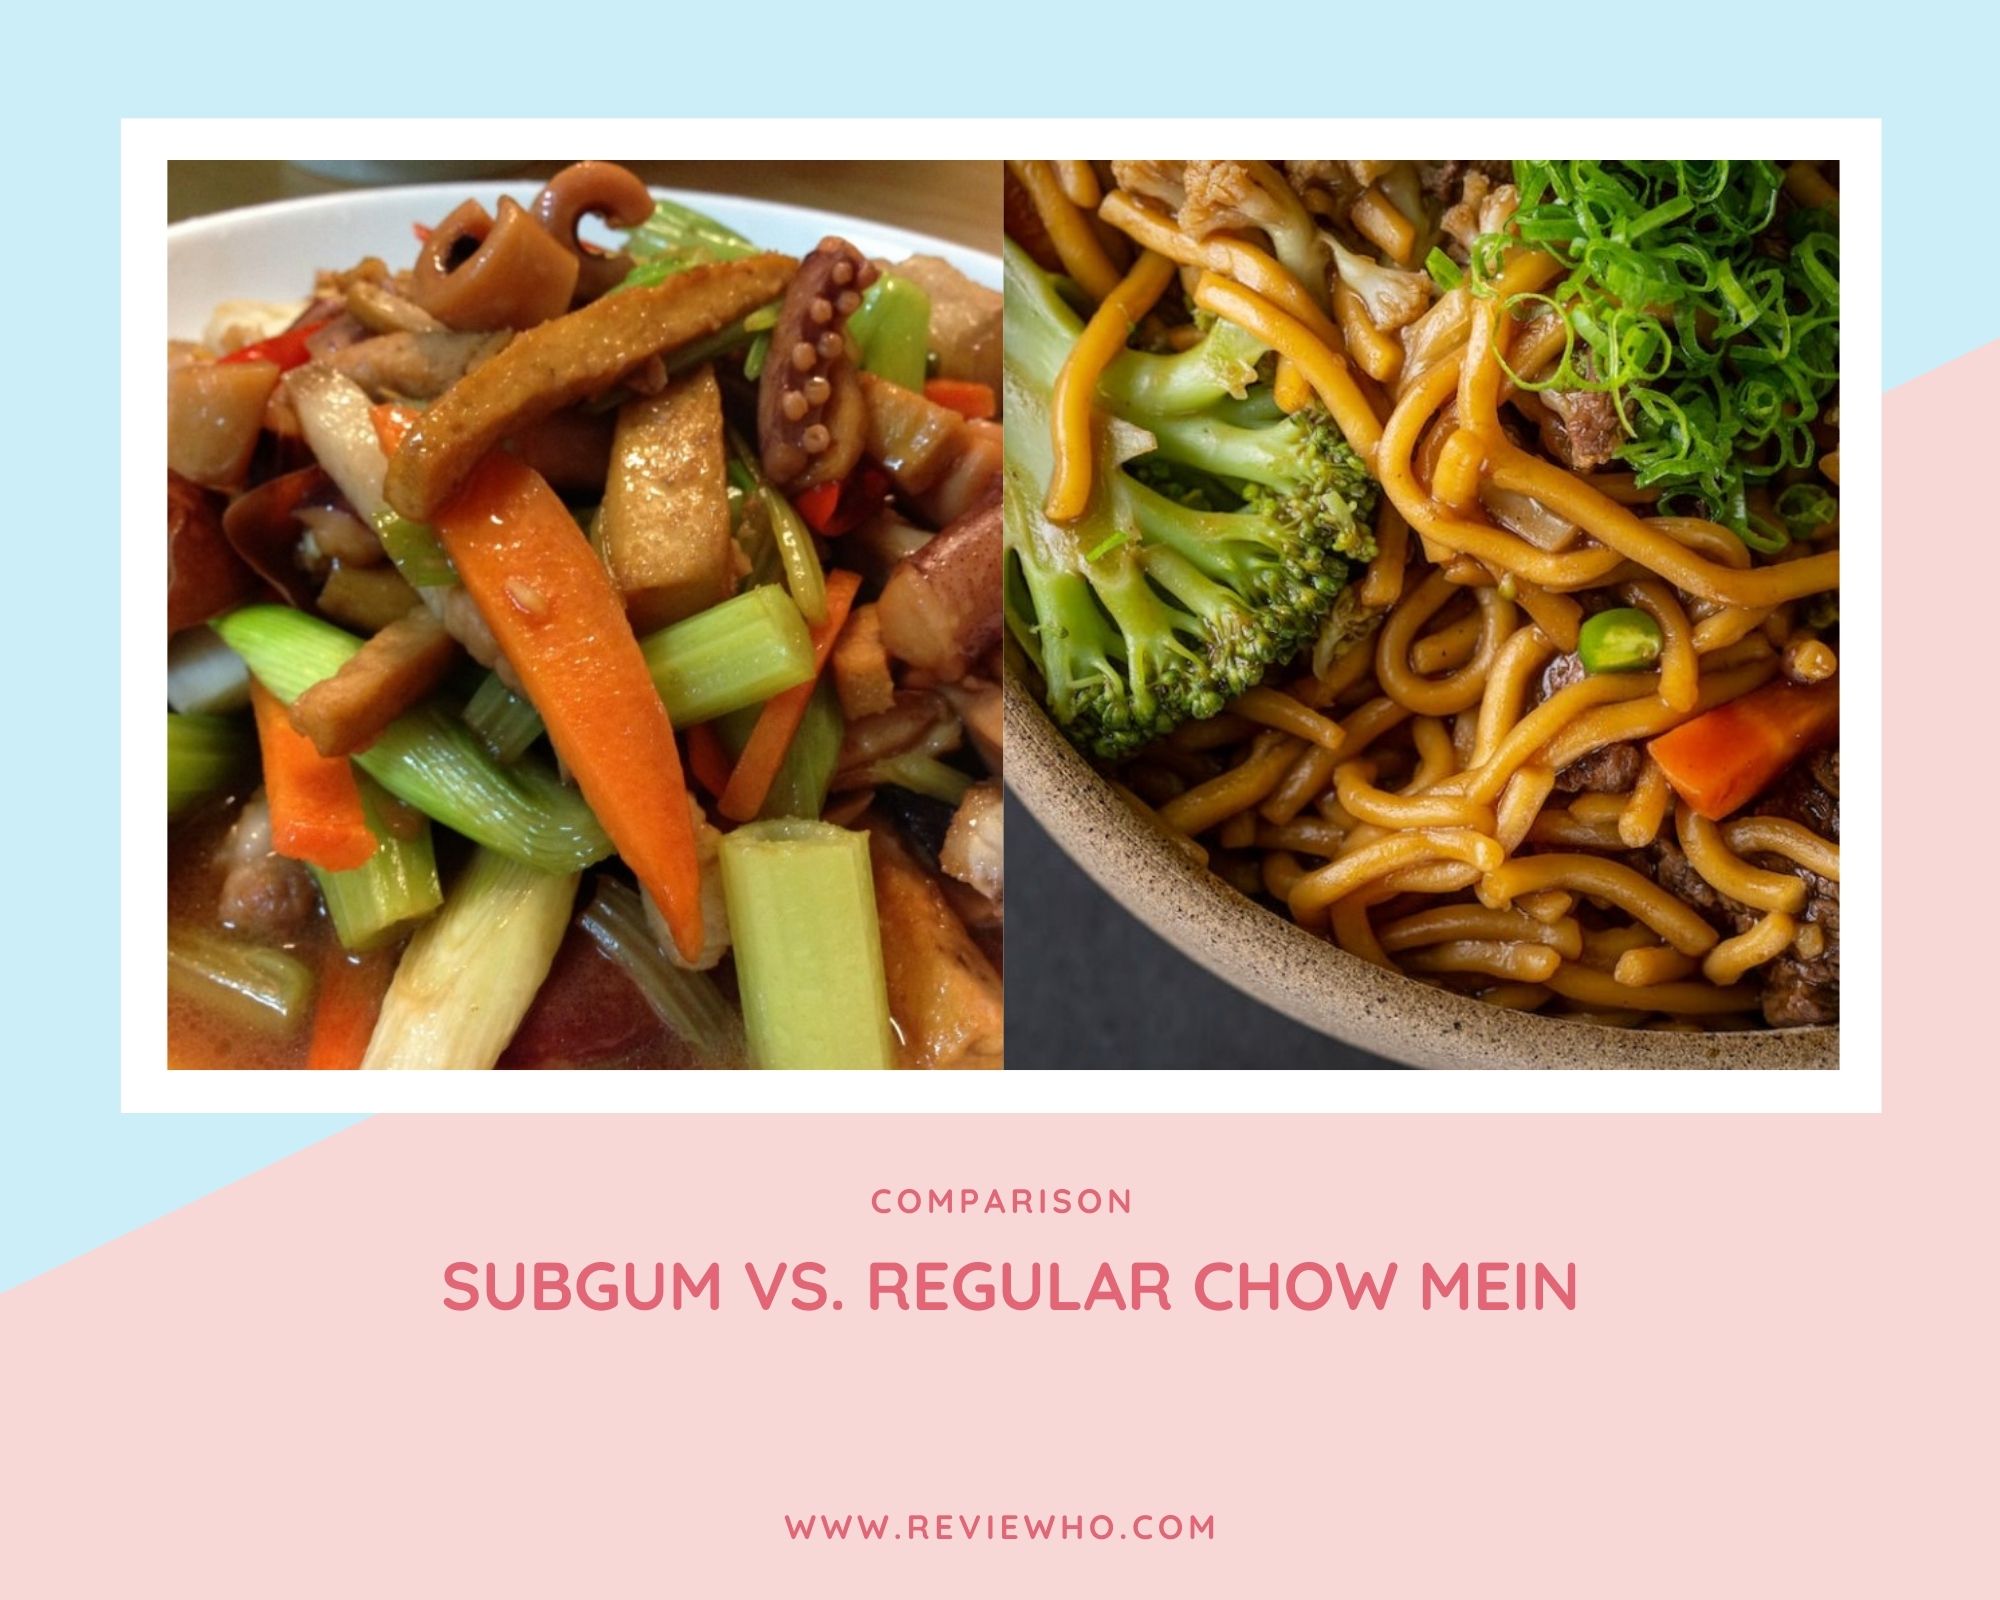 Difference between Subgum and Regular Chow Mein